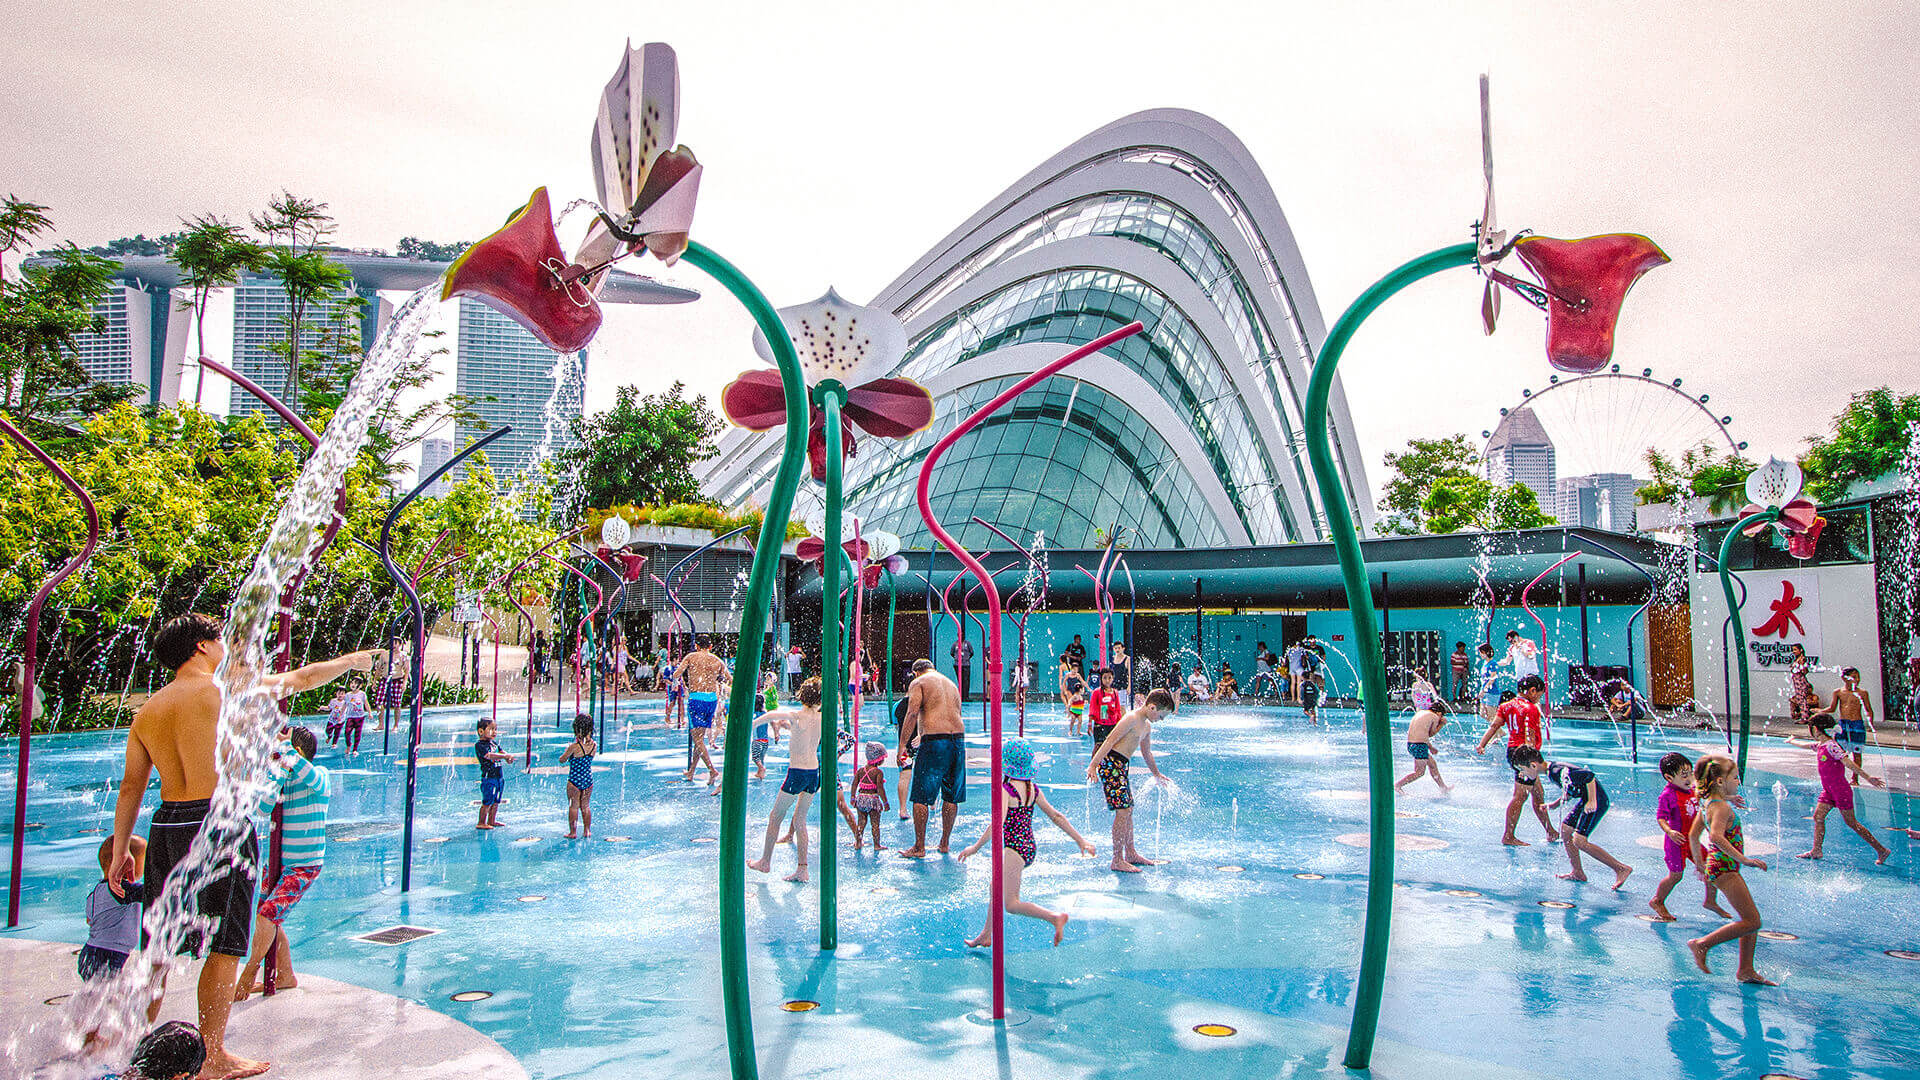 Far East Organization Children’s Garden at Gardens by the Bay, open from 9am to 7pm on Thursdays to Sundays and during school holidays, offering a free playground experience.